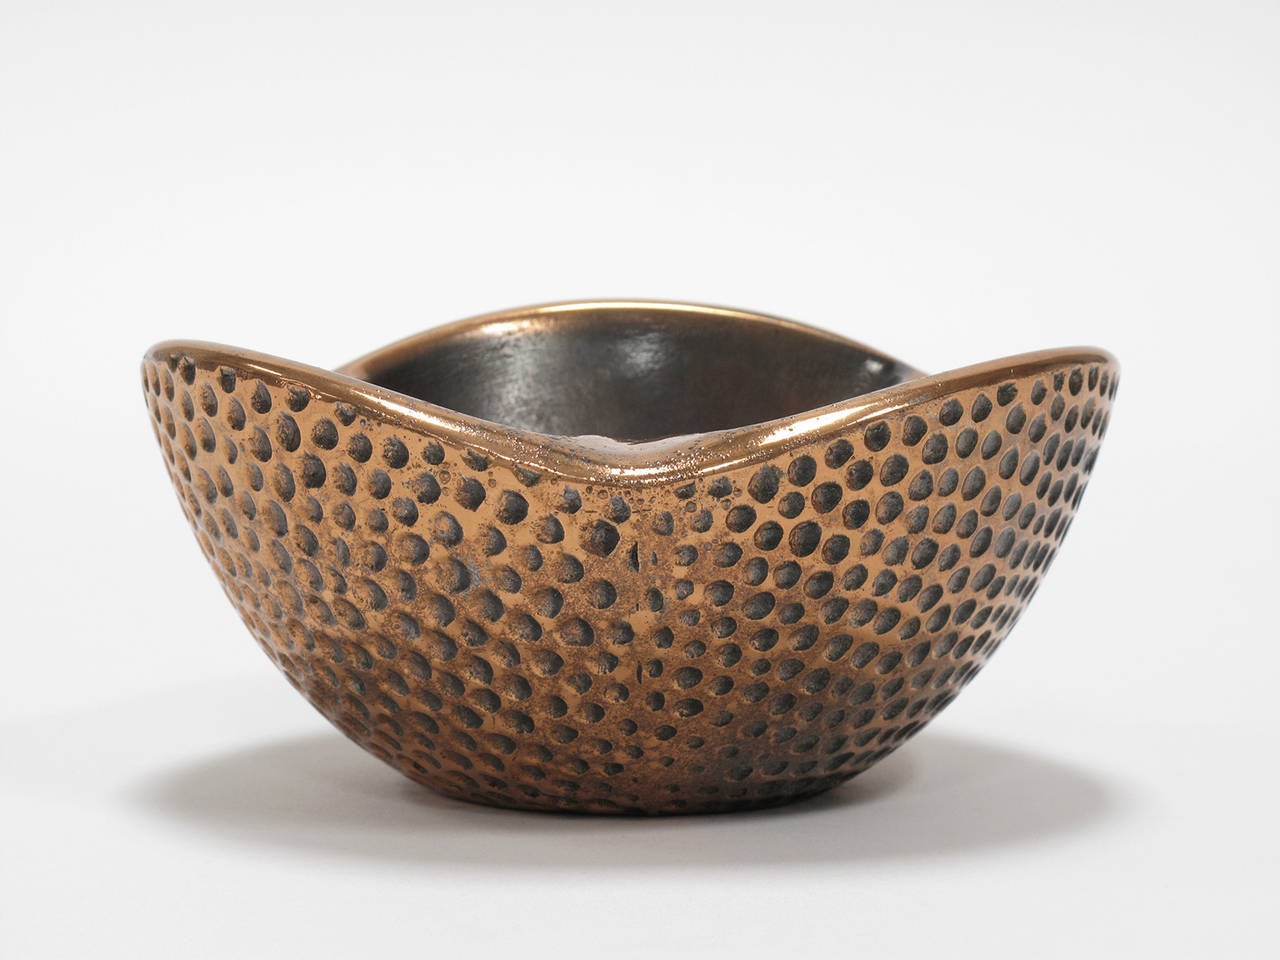 American Dimpled Copper Bowl by Ben Seibel